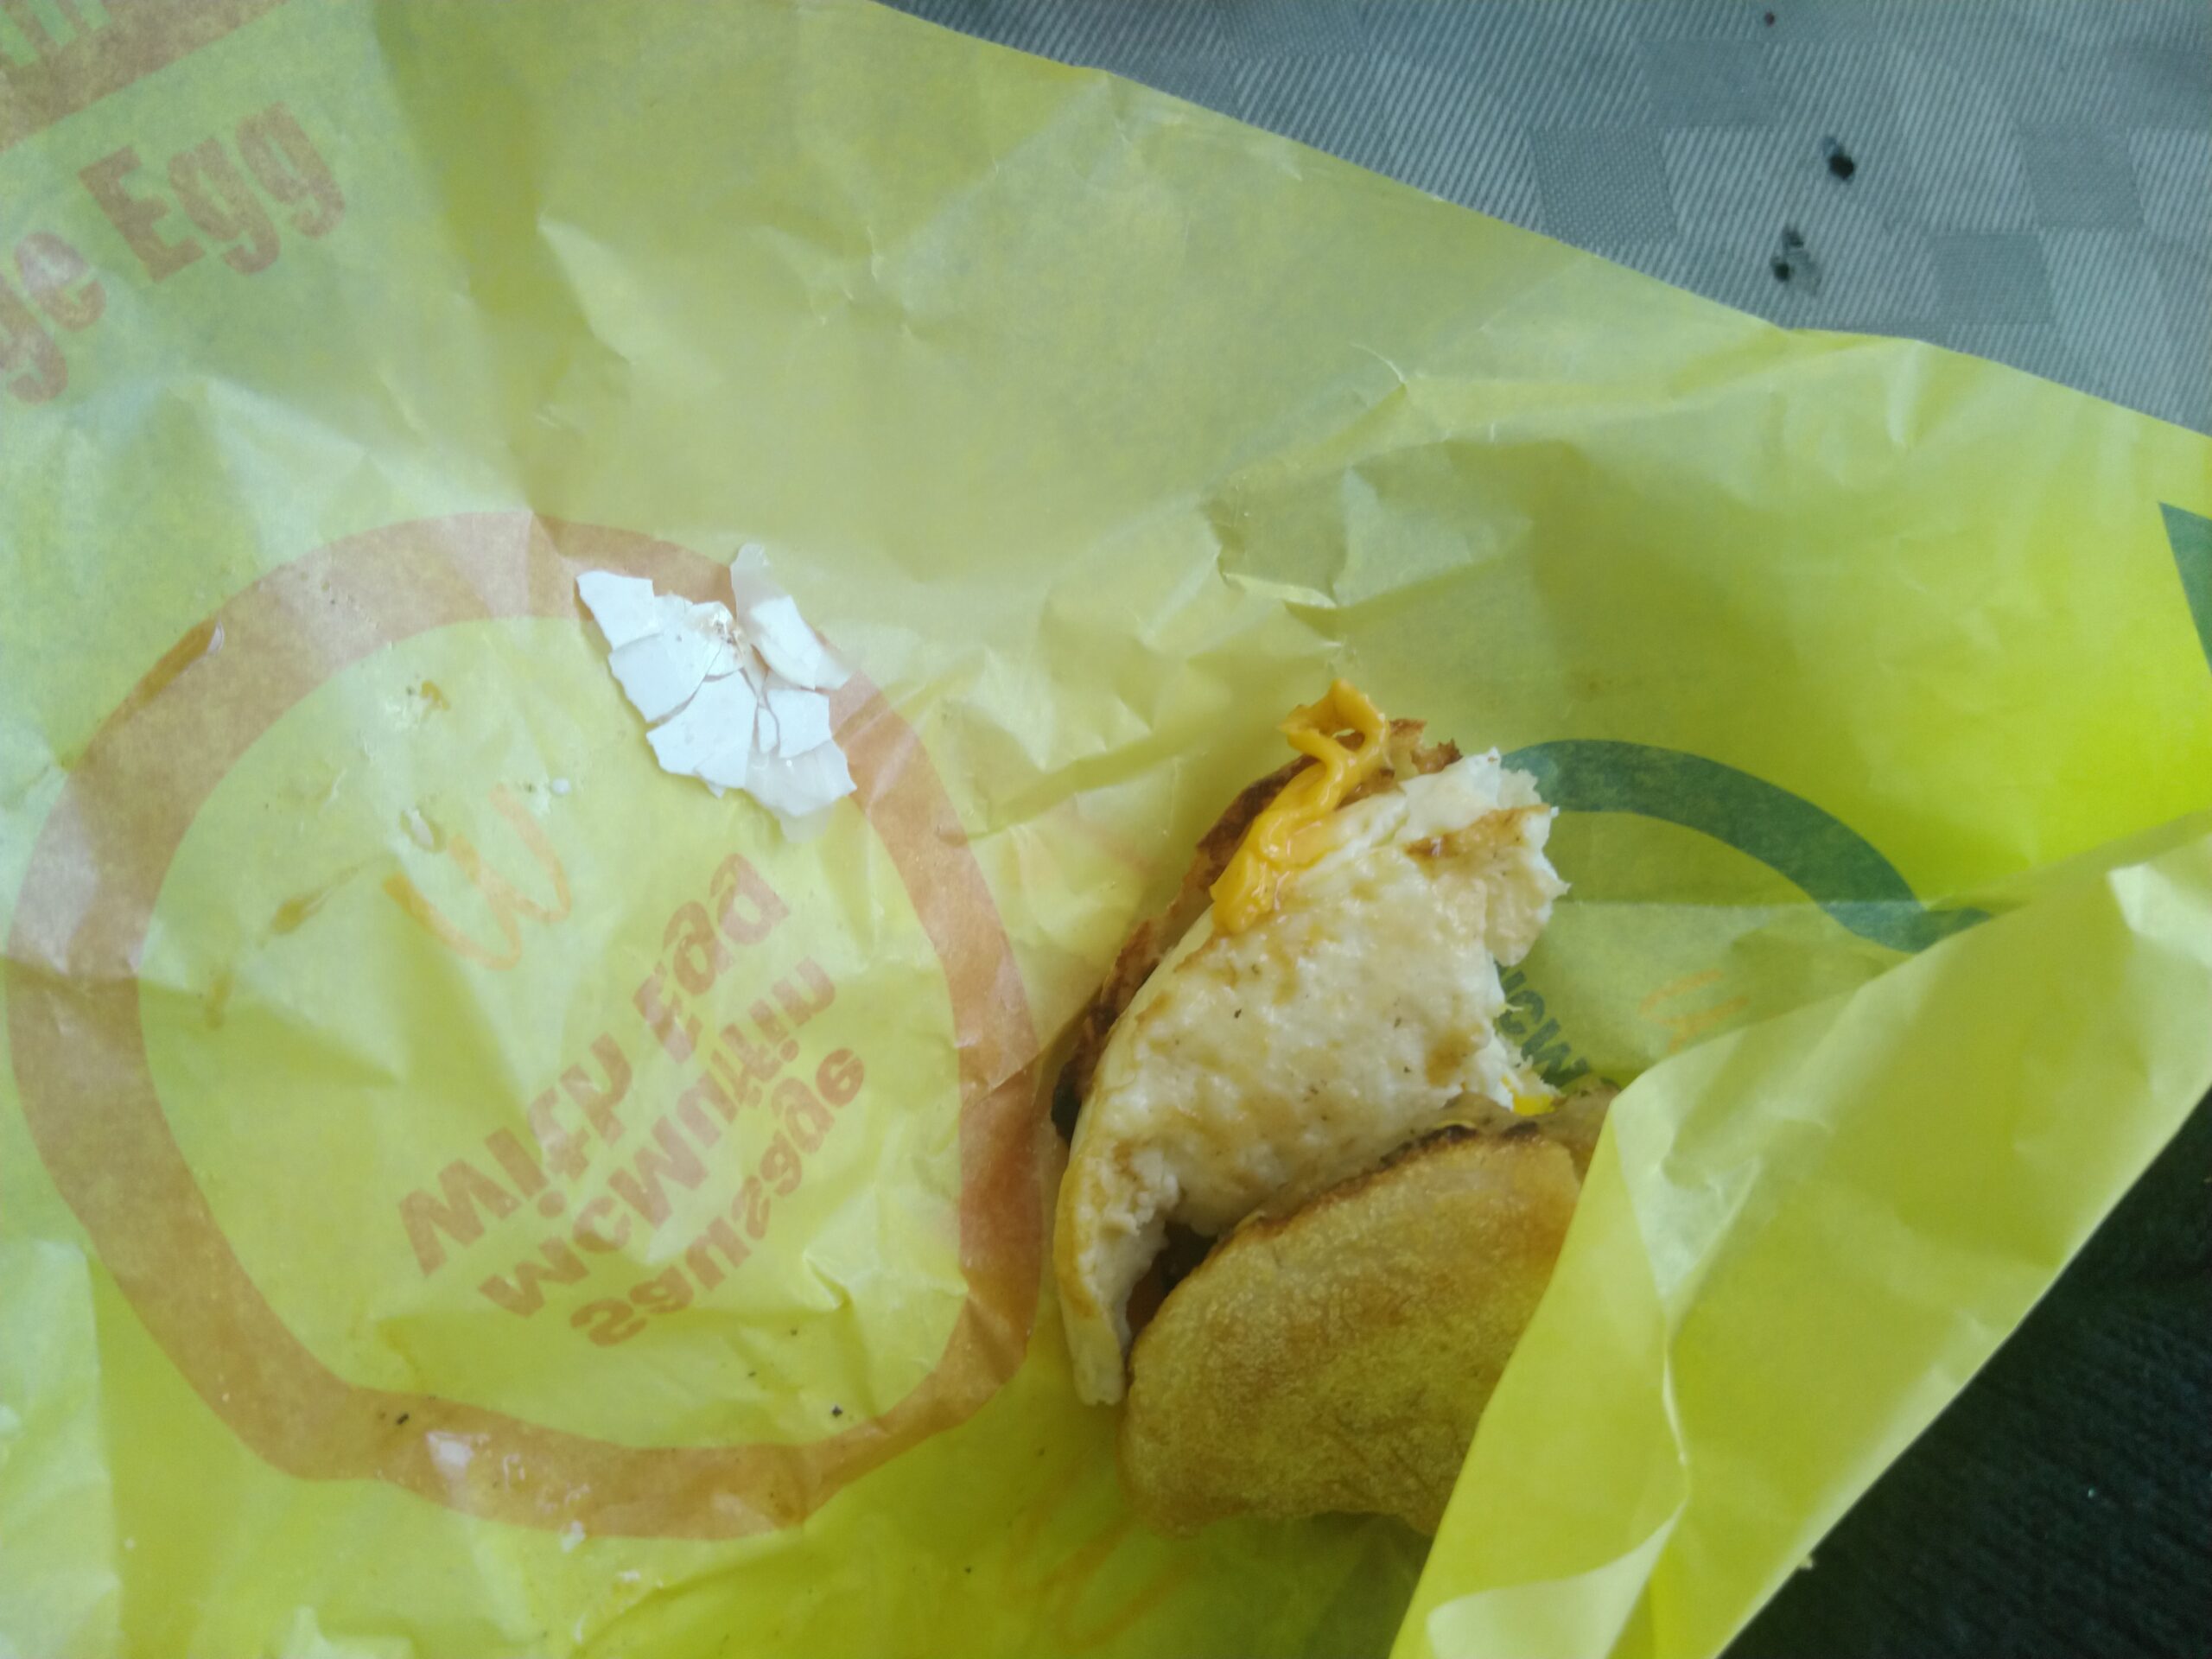 McDonalds complaint Egg shell found in food